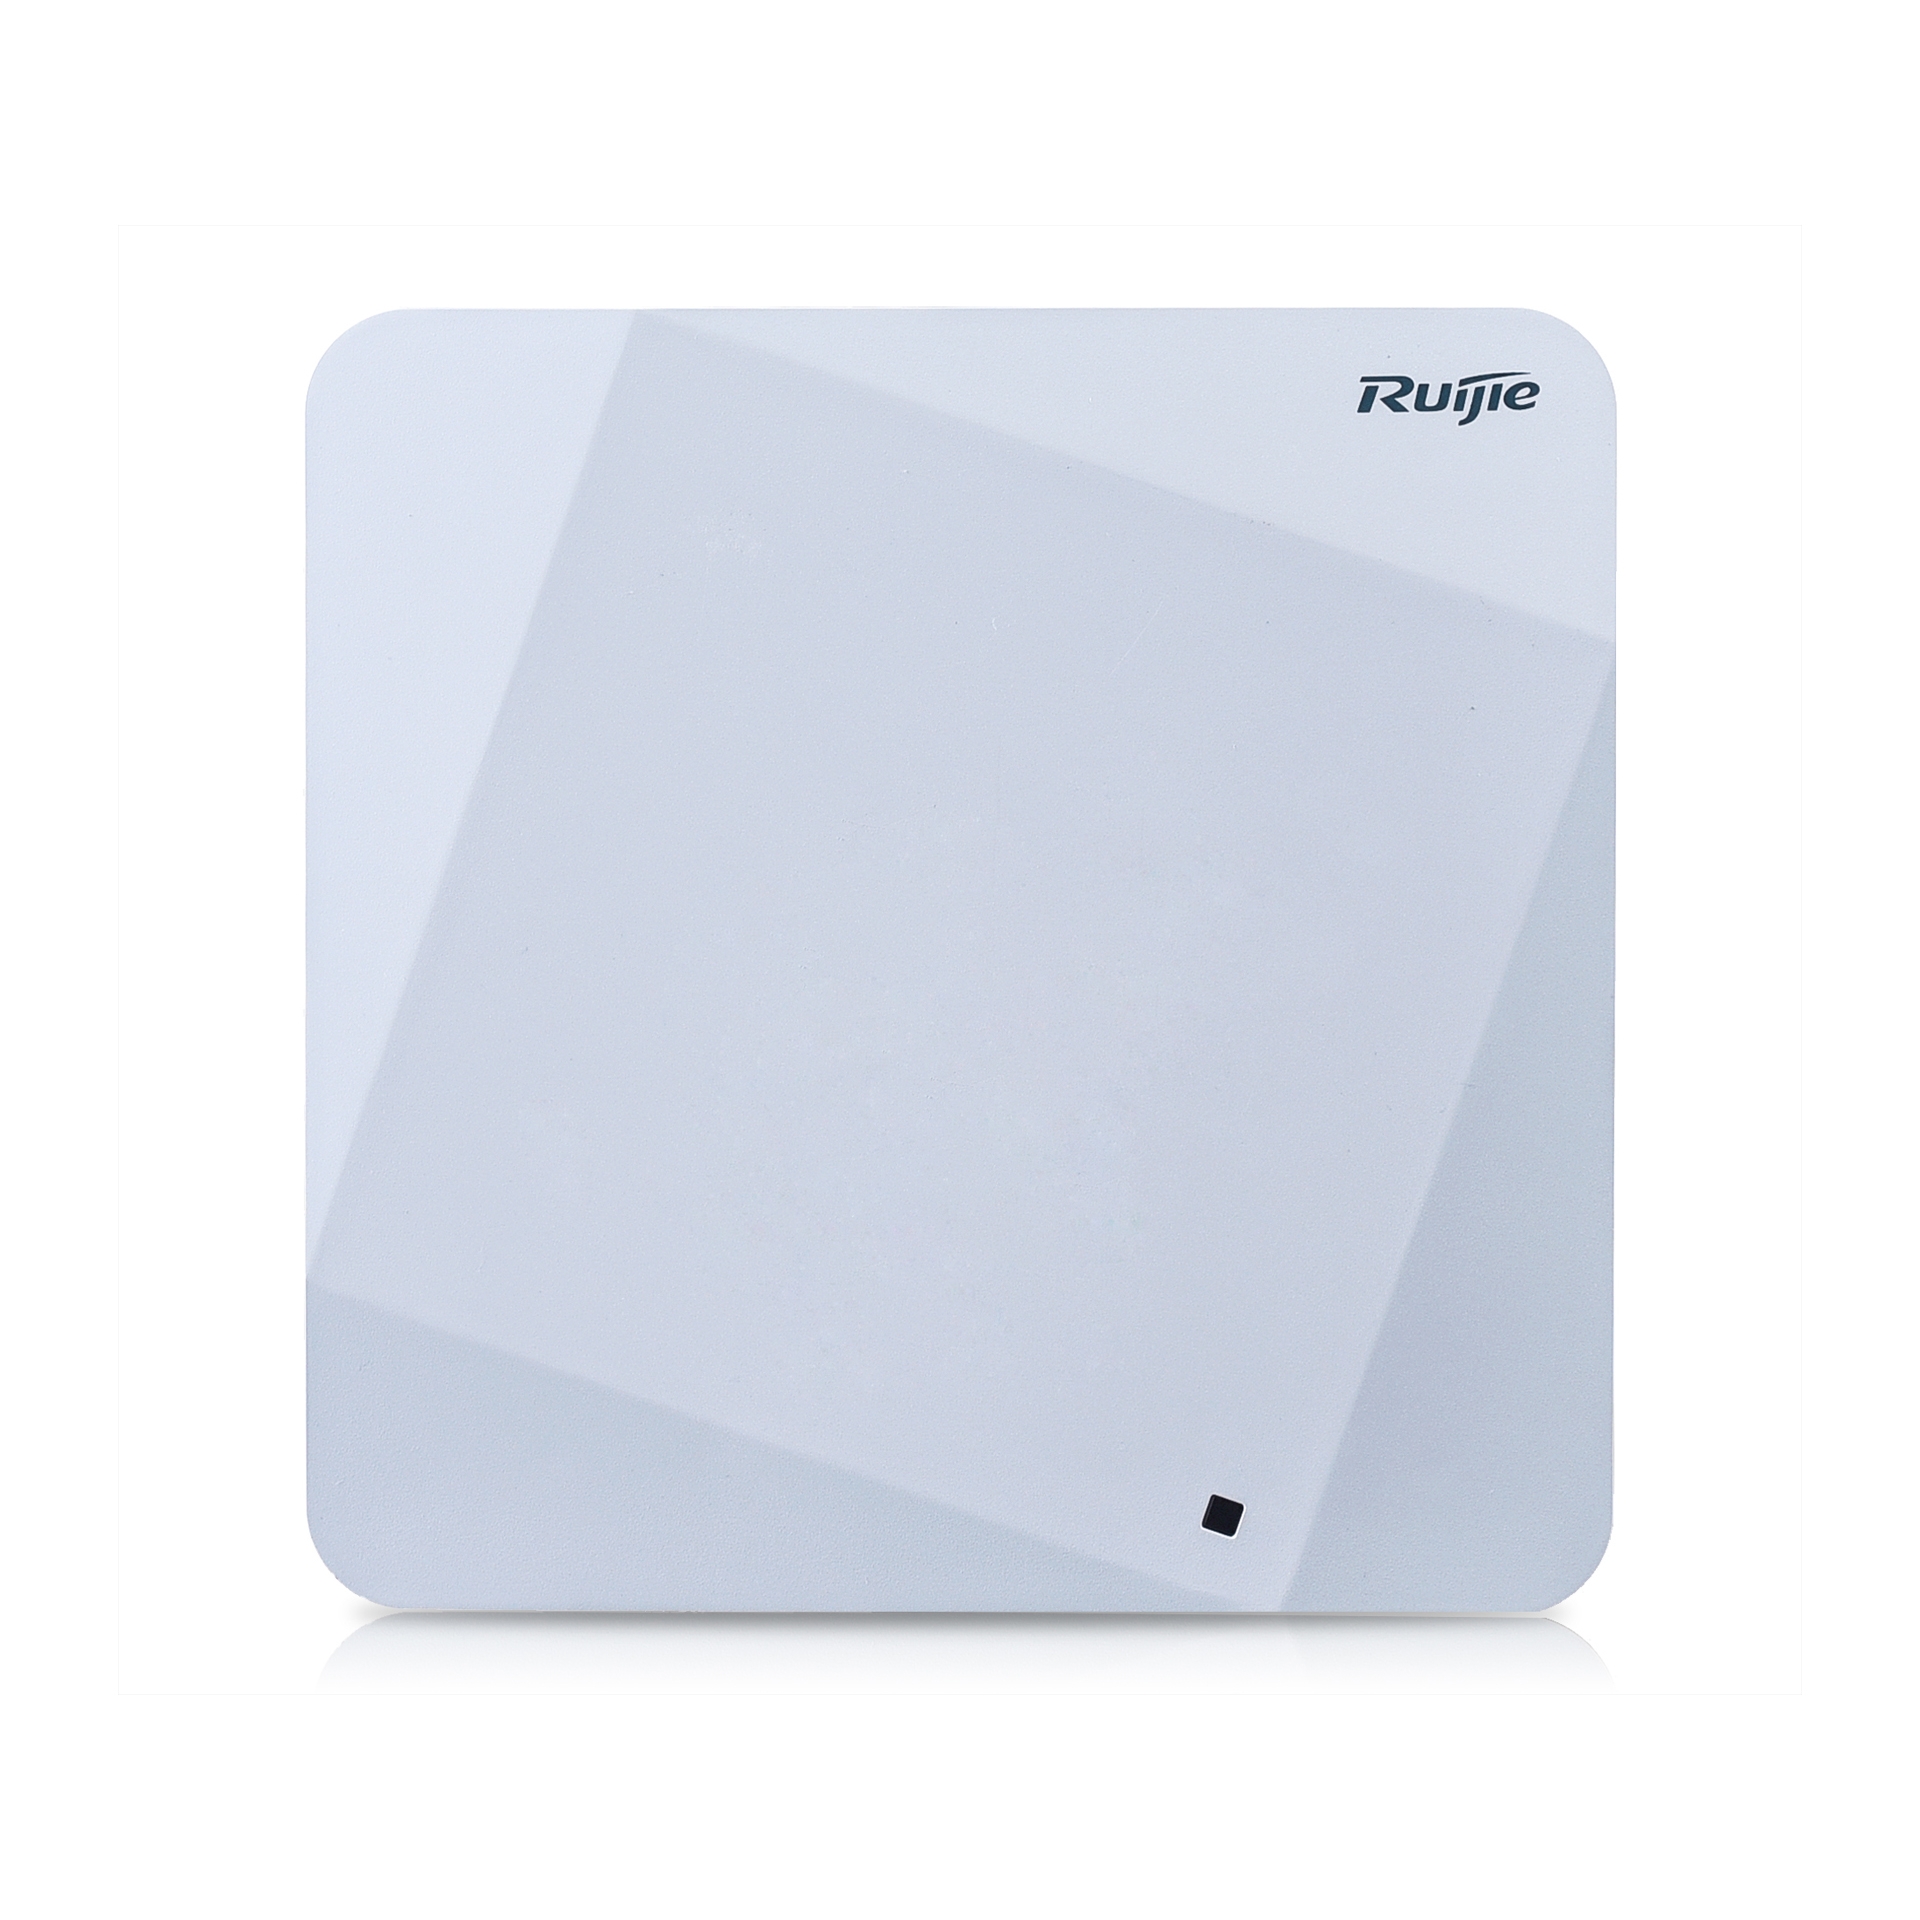 RUIJIE RG-AP720-L 1167MBPS 2PORT 2x2MIMO 2.4 GHZ & 5 GHZ INDOOR WAVE2 ACCESS POINT